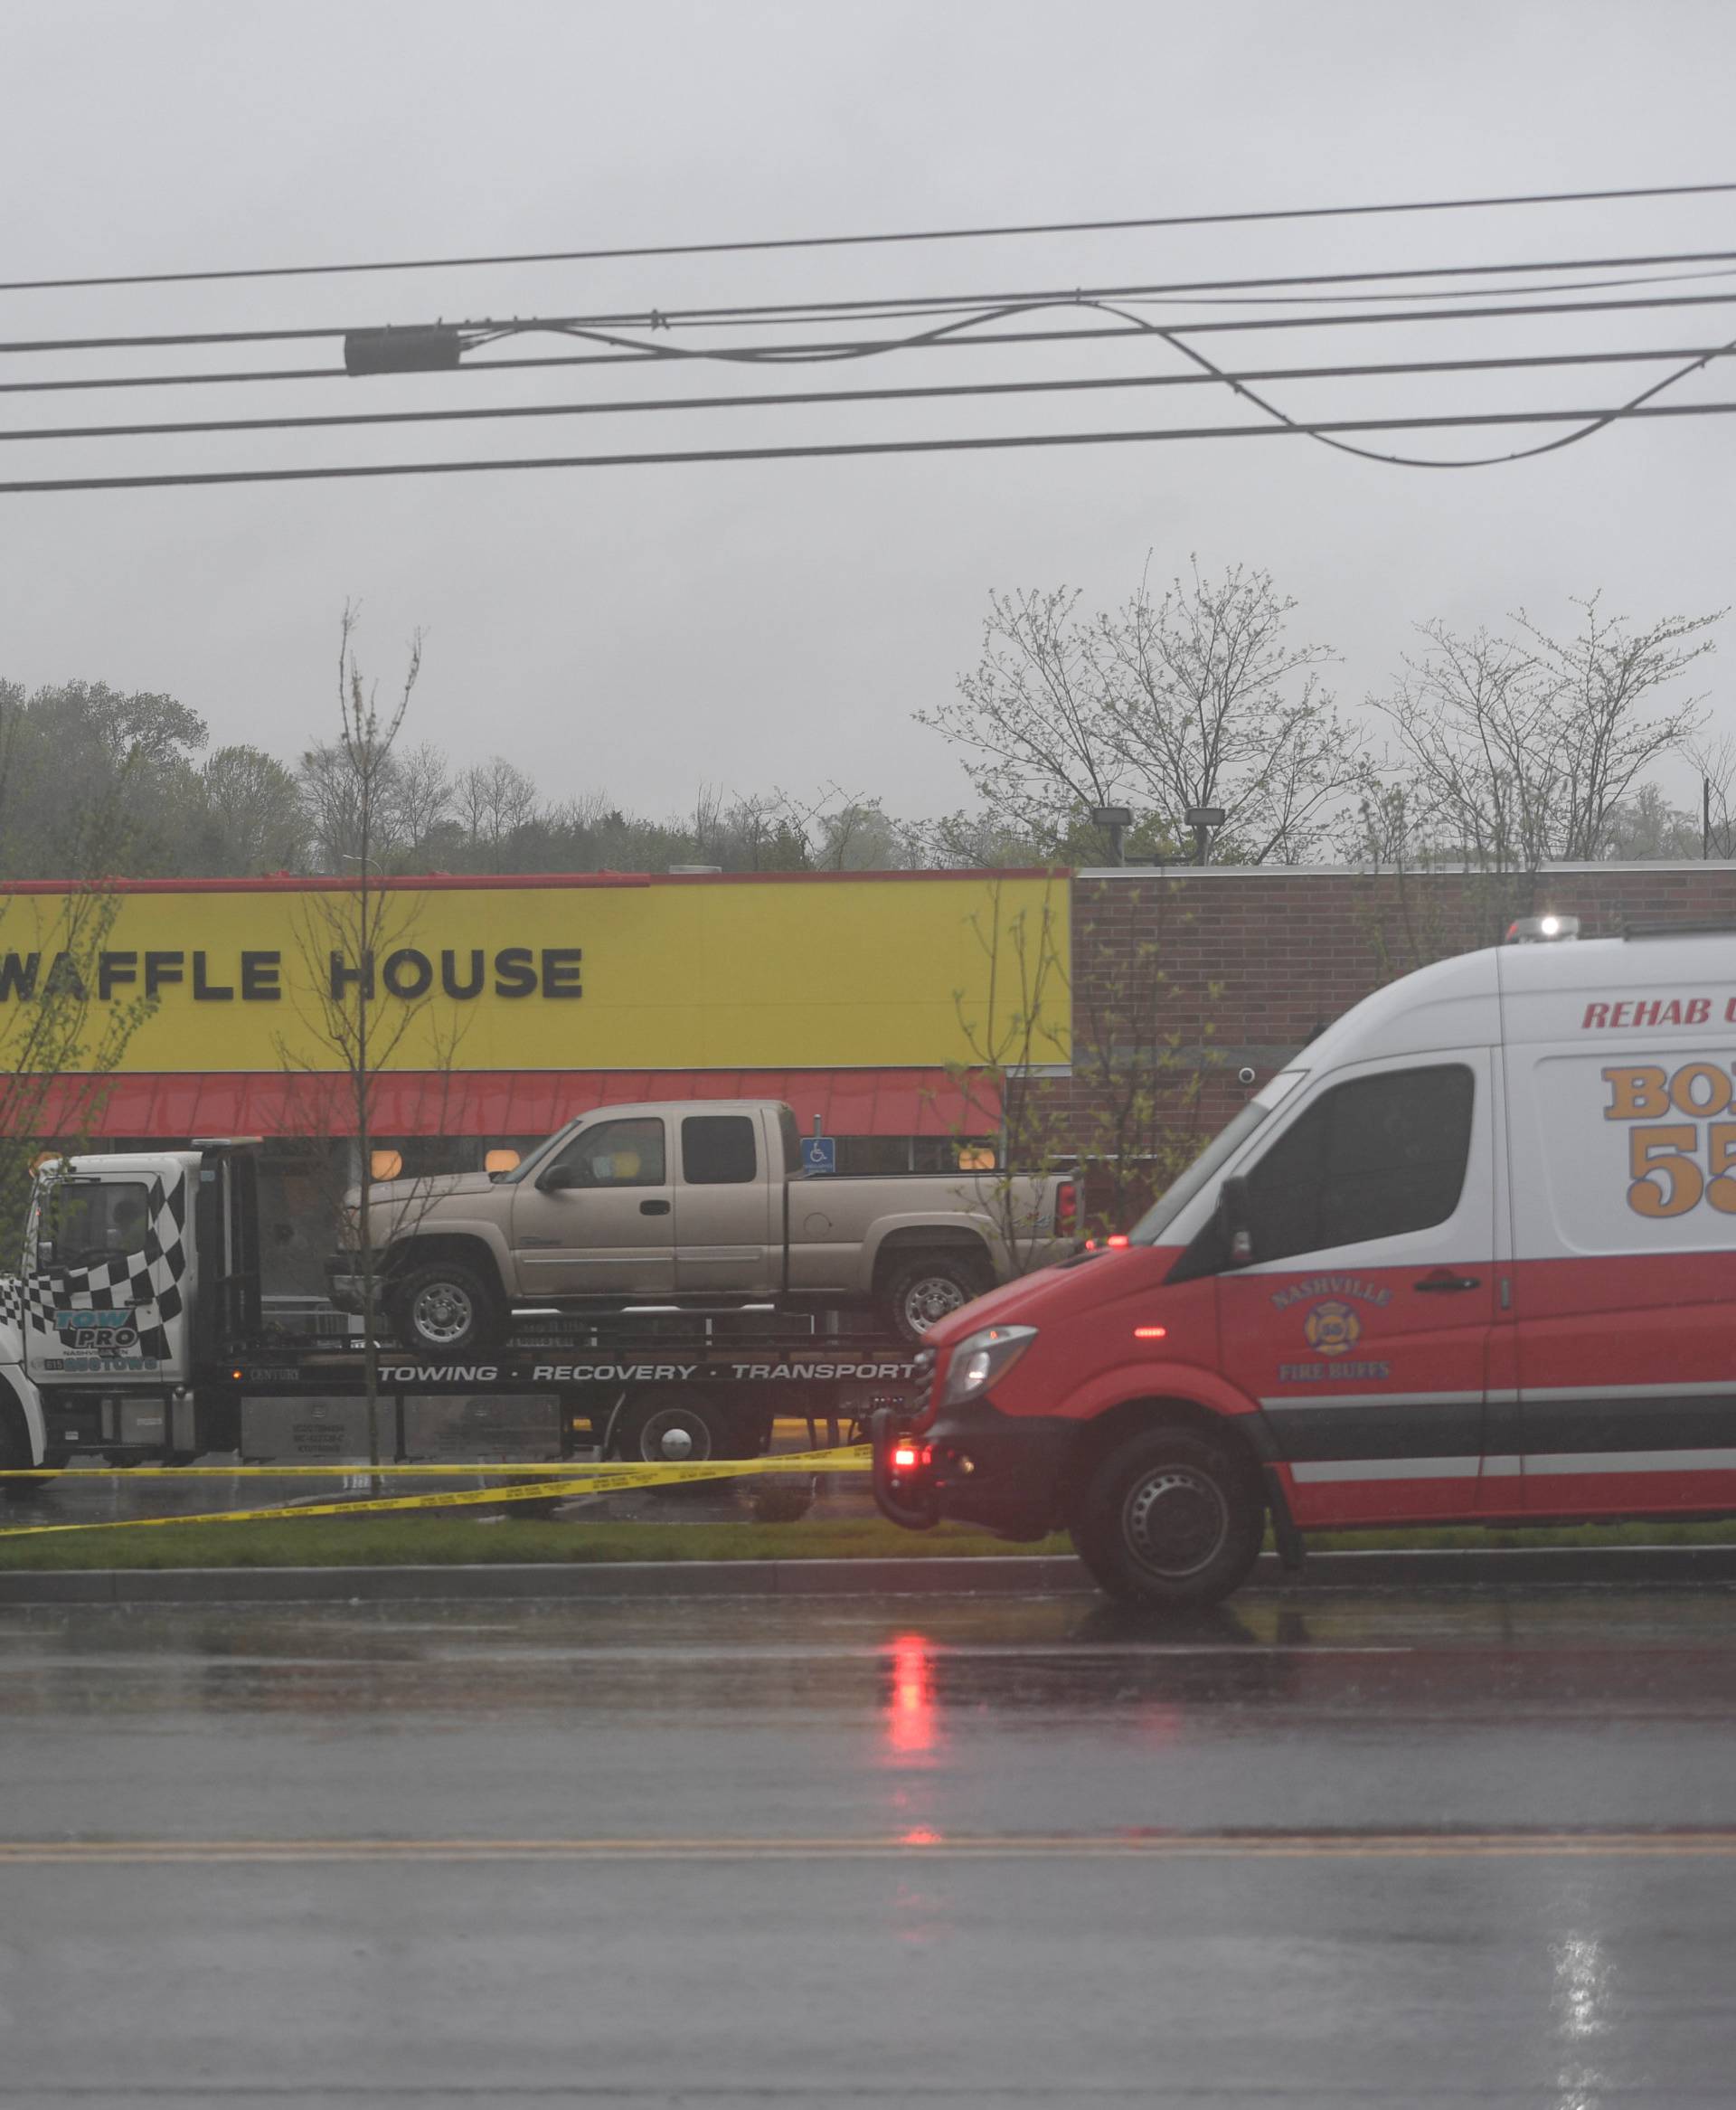 The truck of Travis Reinking, the suspected shooter, is loaded on a trailer ready to be towed from the scene of a fatal shooting at a Waffle House restaurant near Nashville, Tennessee